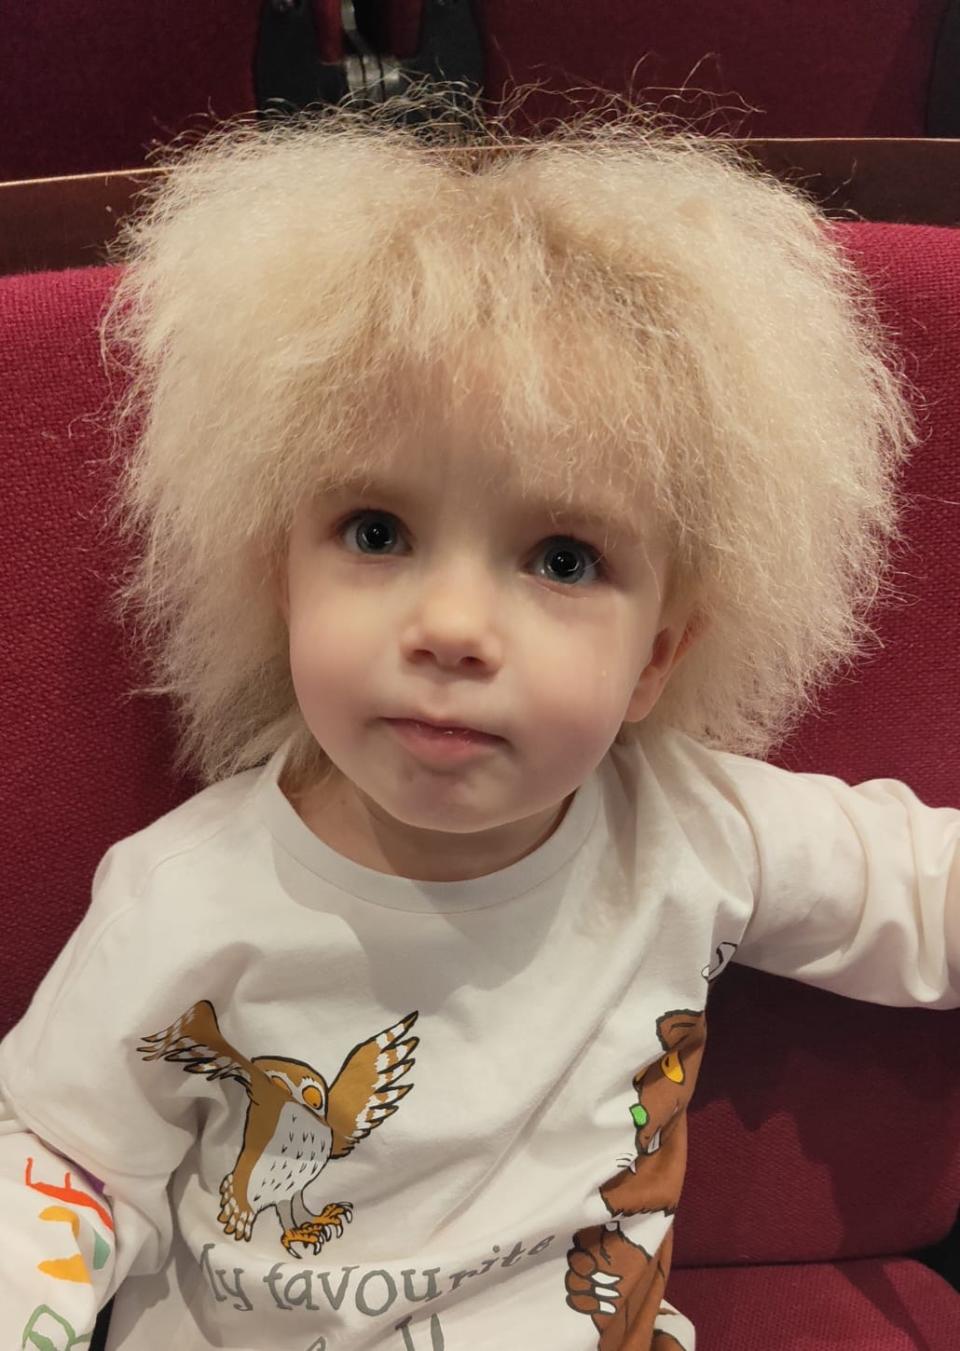 Layla has been diagnosed with uncombable hair syndrome (UHS) - a condition characterised by dry, frizzy hair which defies attempts to tame it.(Charlotte Davis/SWNS)